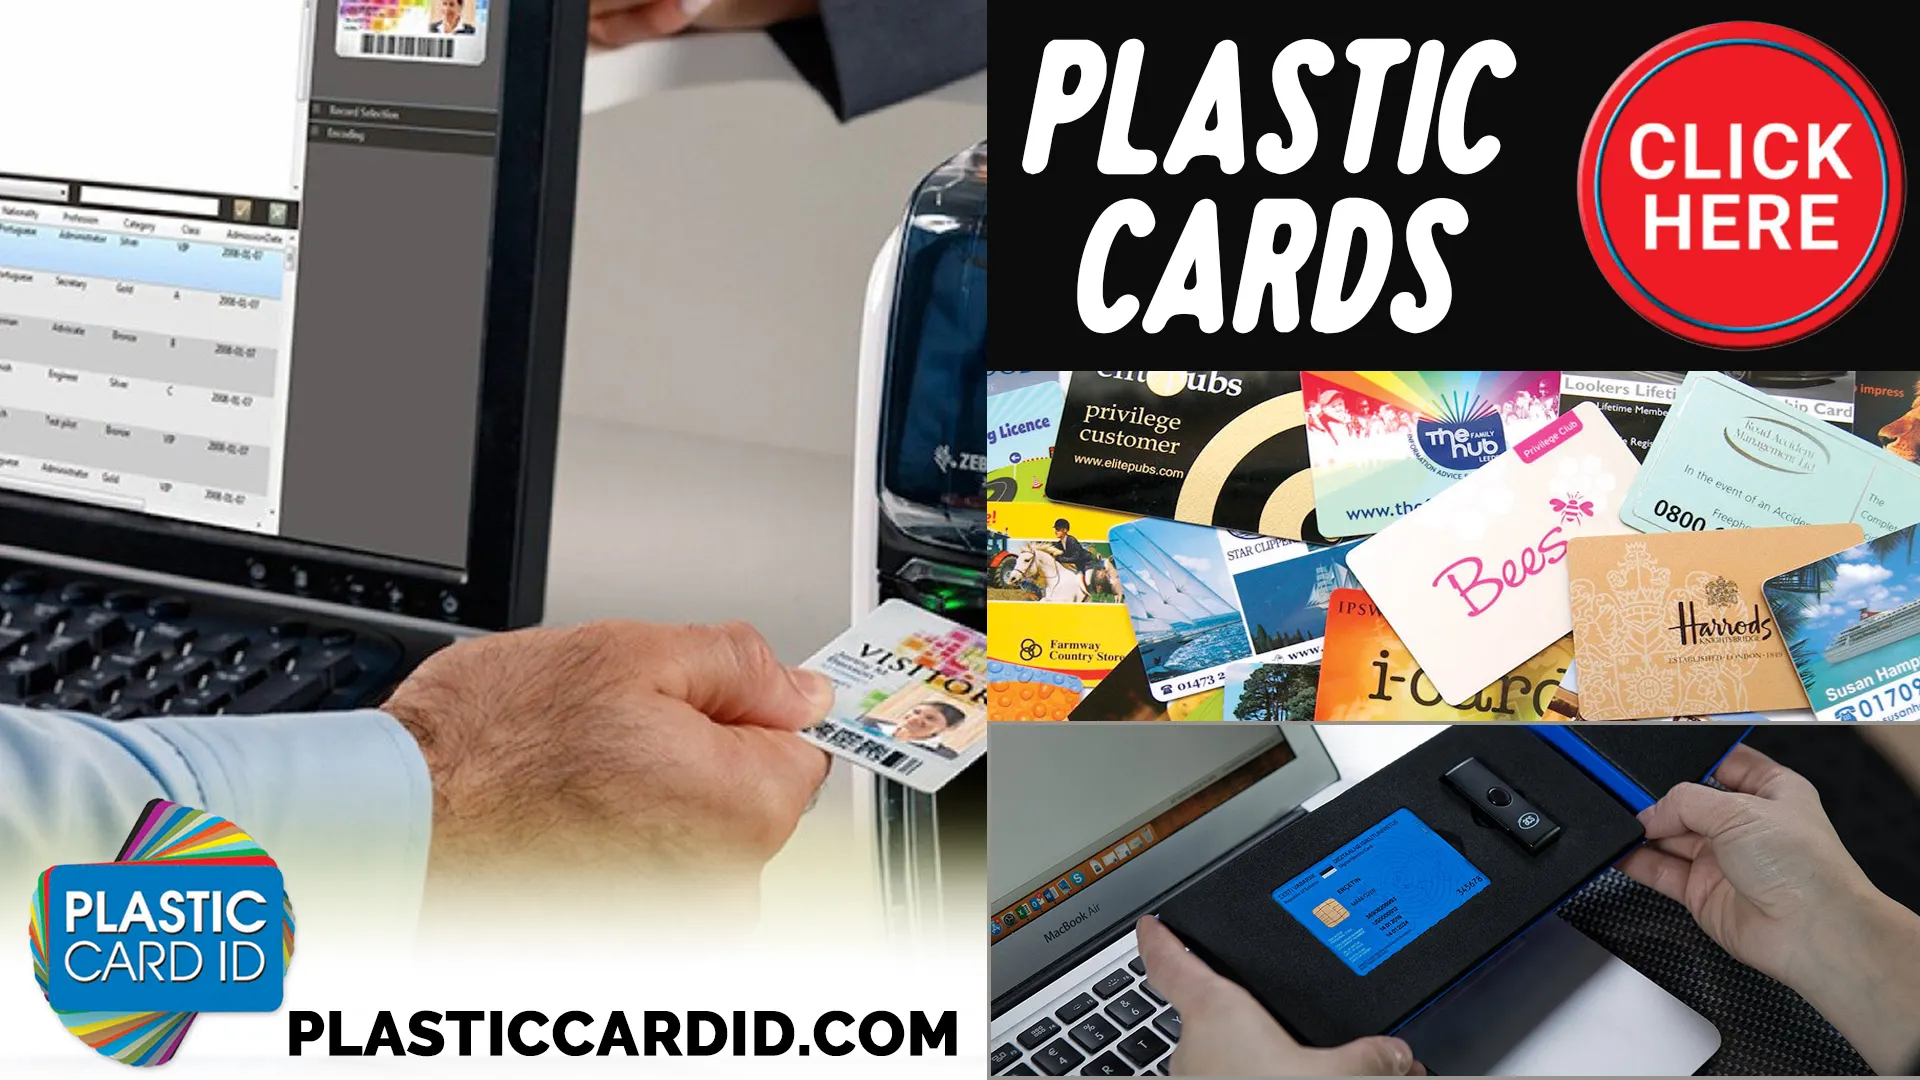 Your All-in-One Provider for Plastic Cards and Printers